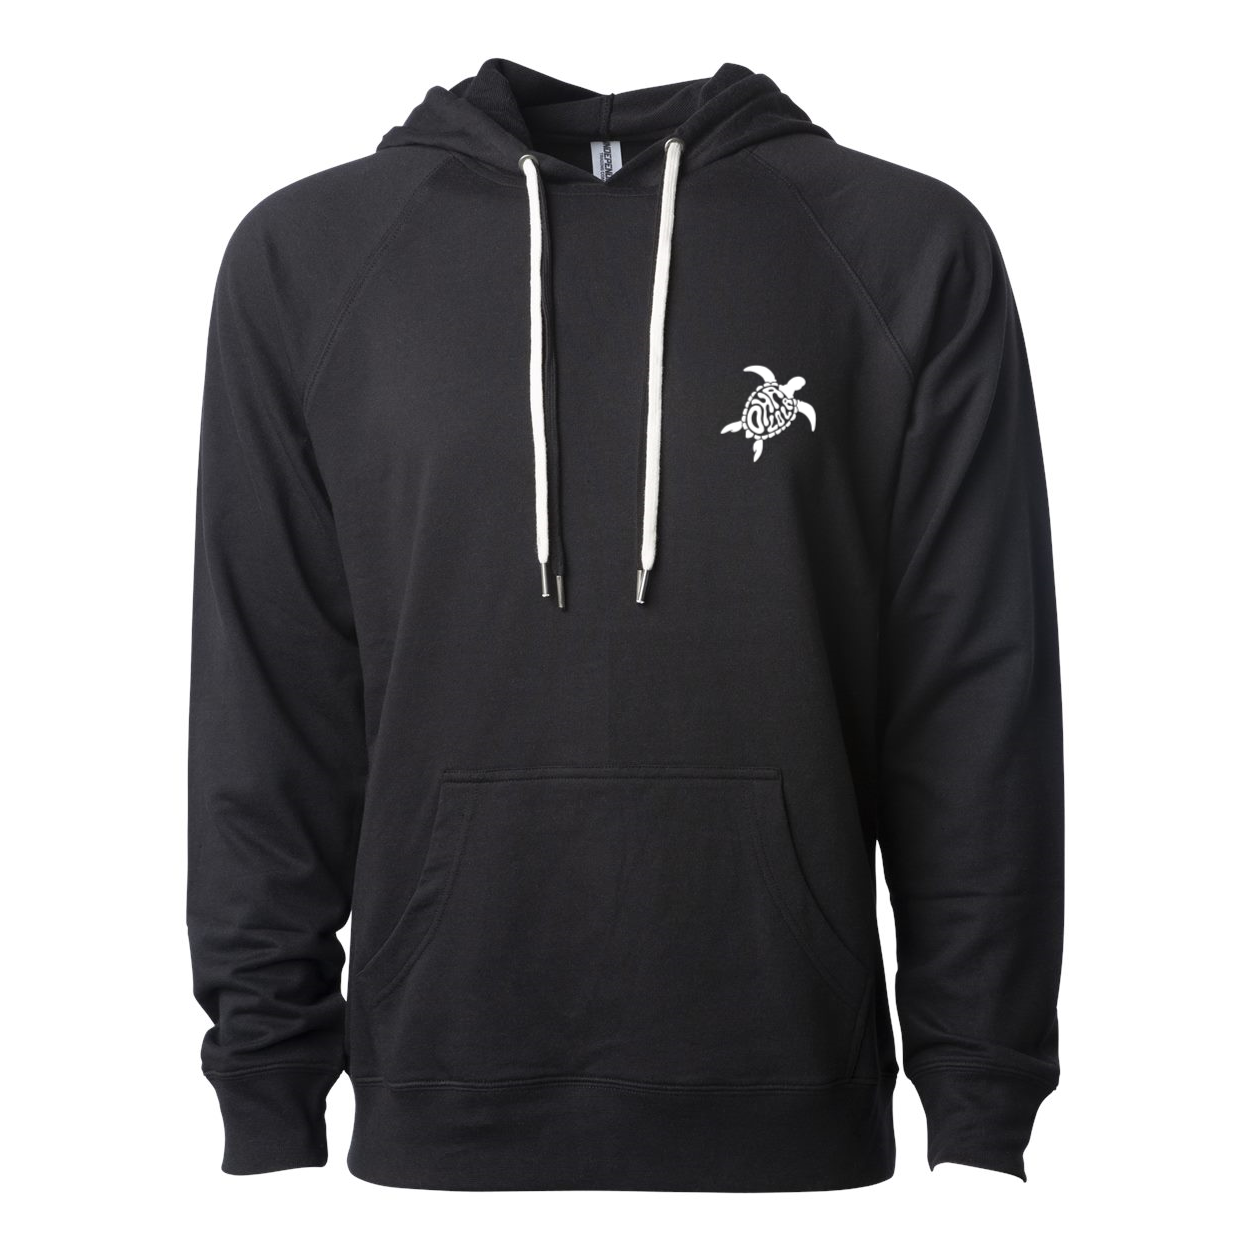 Go with the Flow Lightweight Hoodie